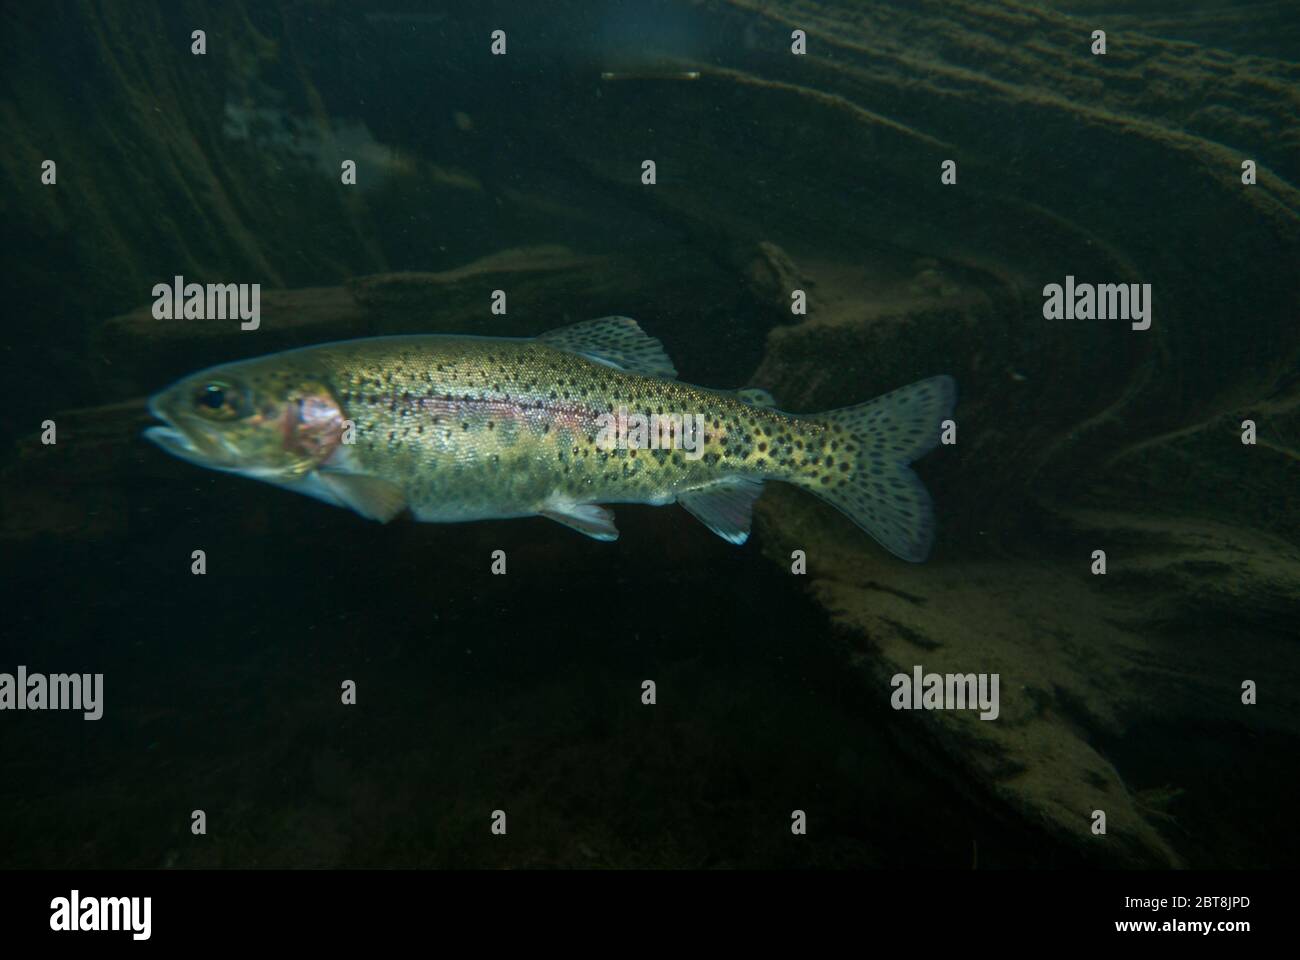 Redband trout (Oncorhynchus mykiss) Stock Photo